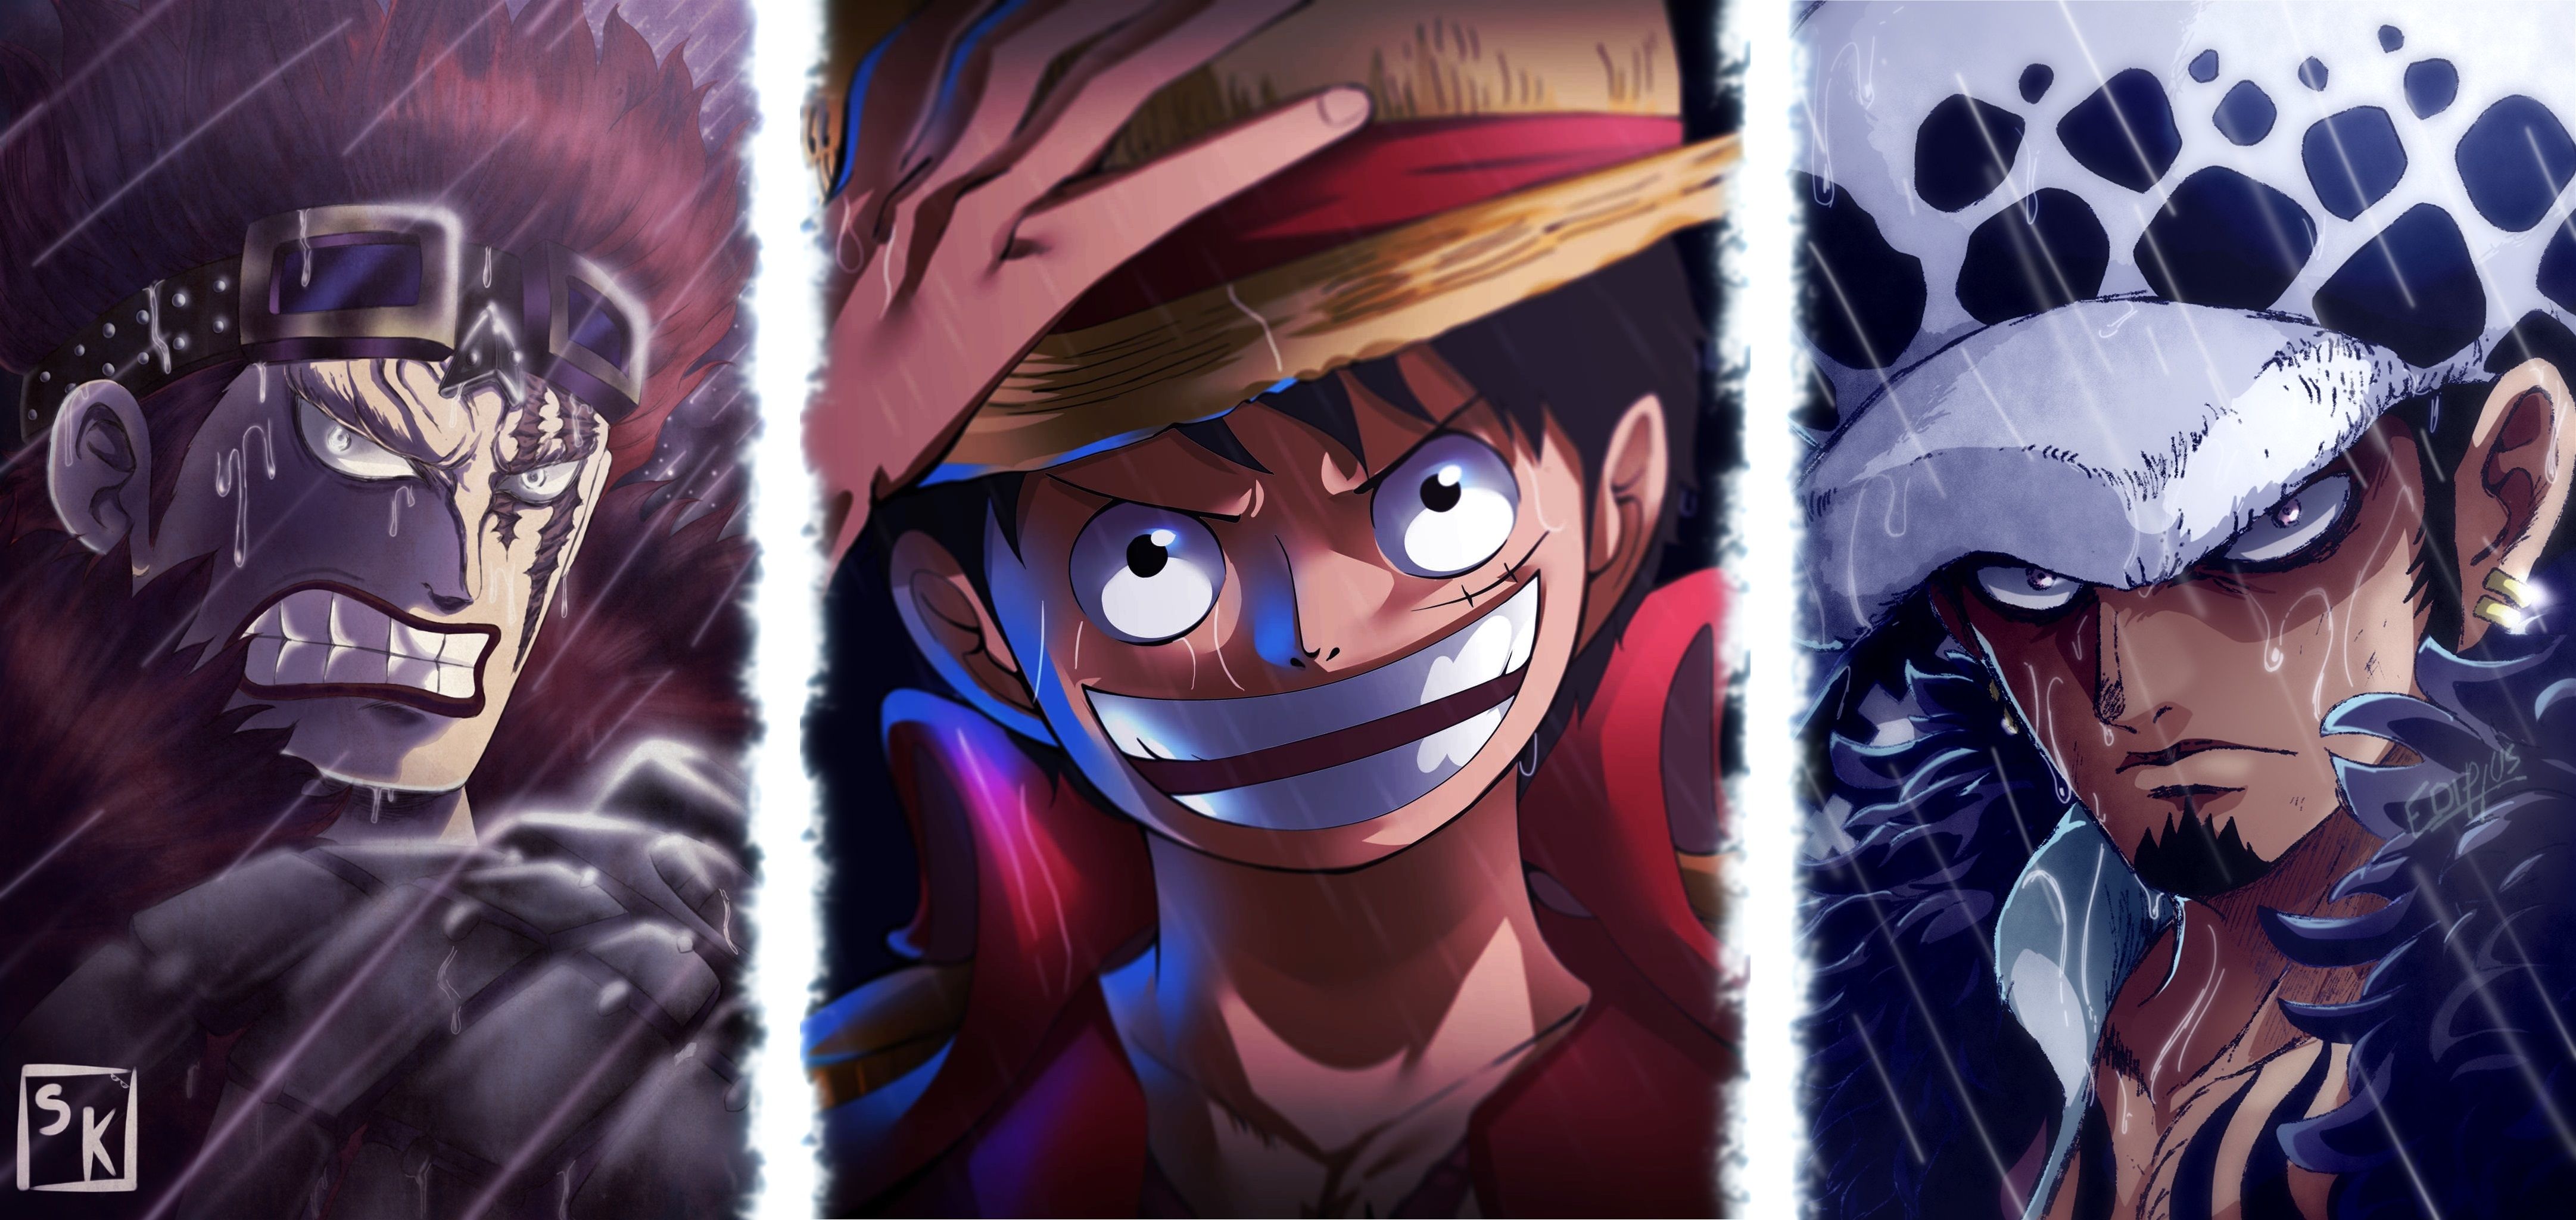 One Piece Team Art iPad Air Wallpaper, HD Anime 4K Wallpaper, Image, Photo and Background